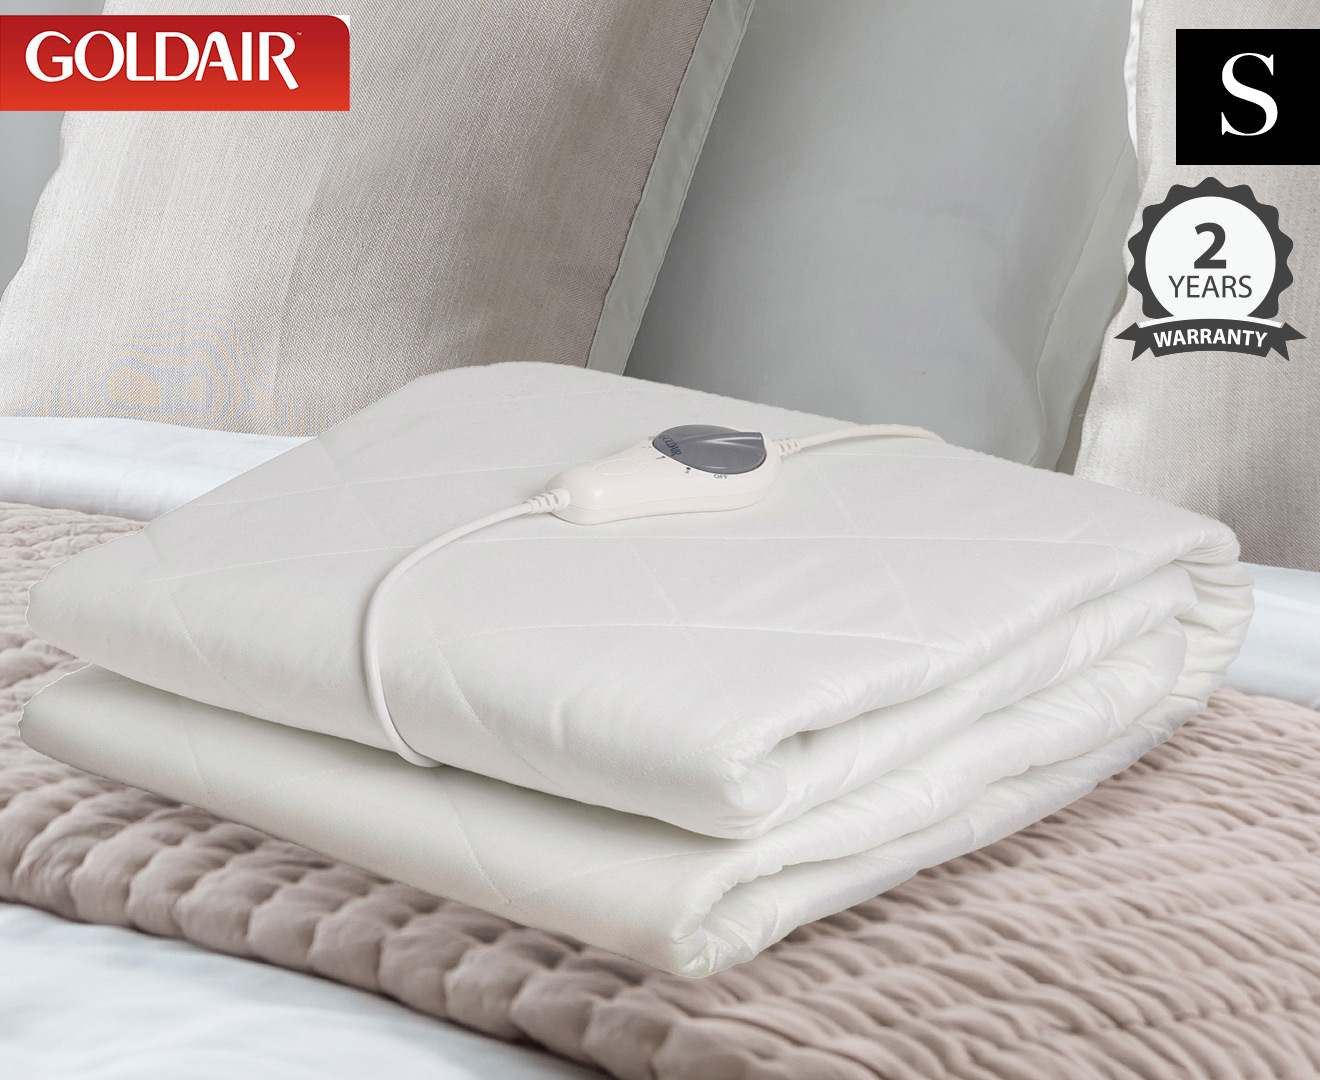 electric blanket above or below mattress protector